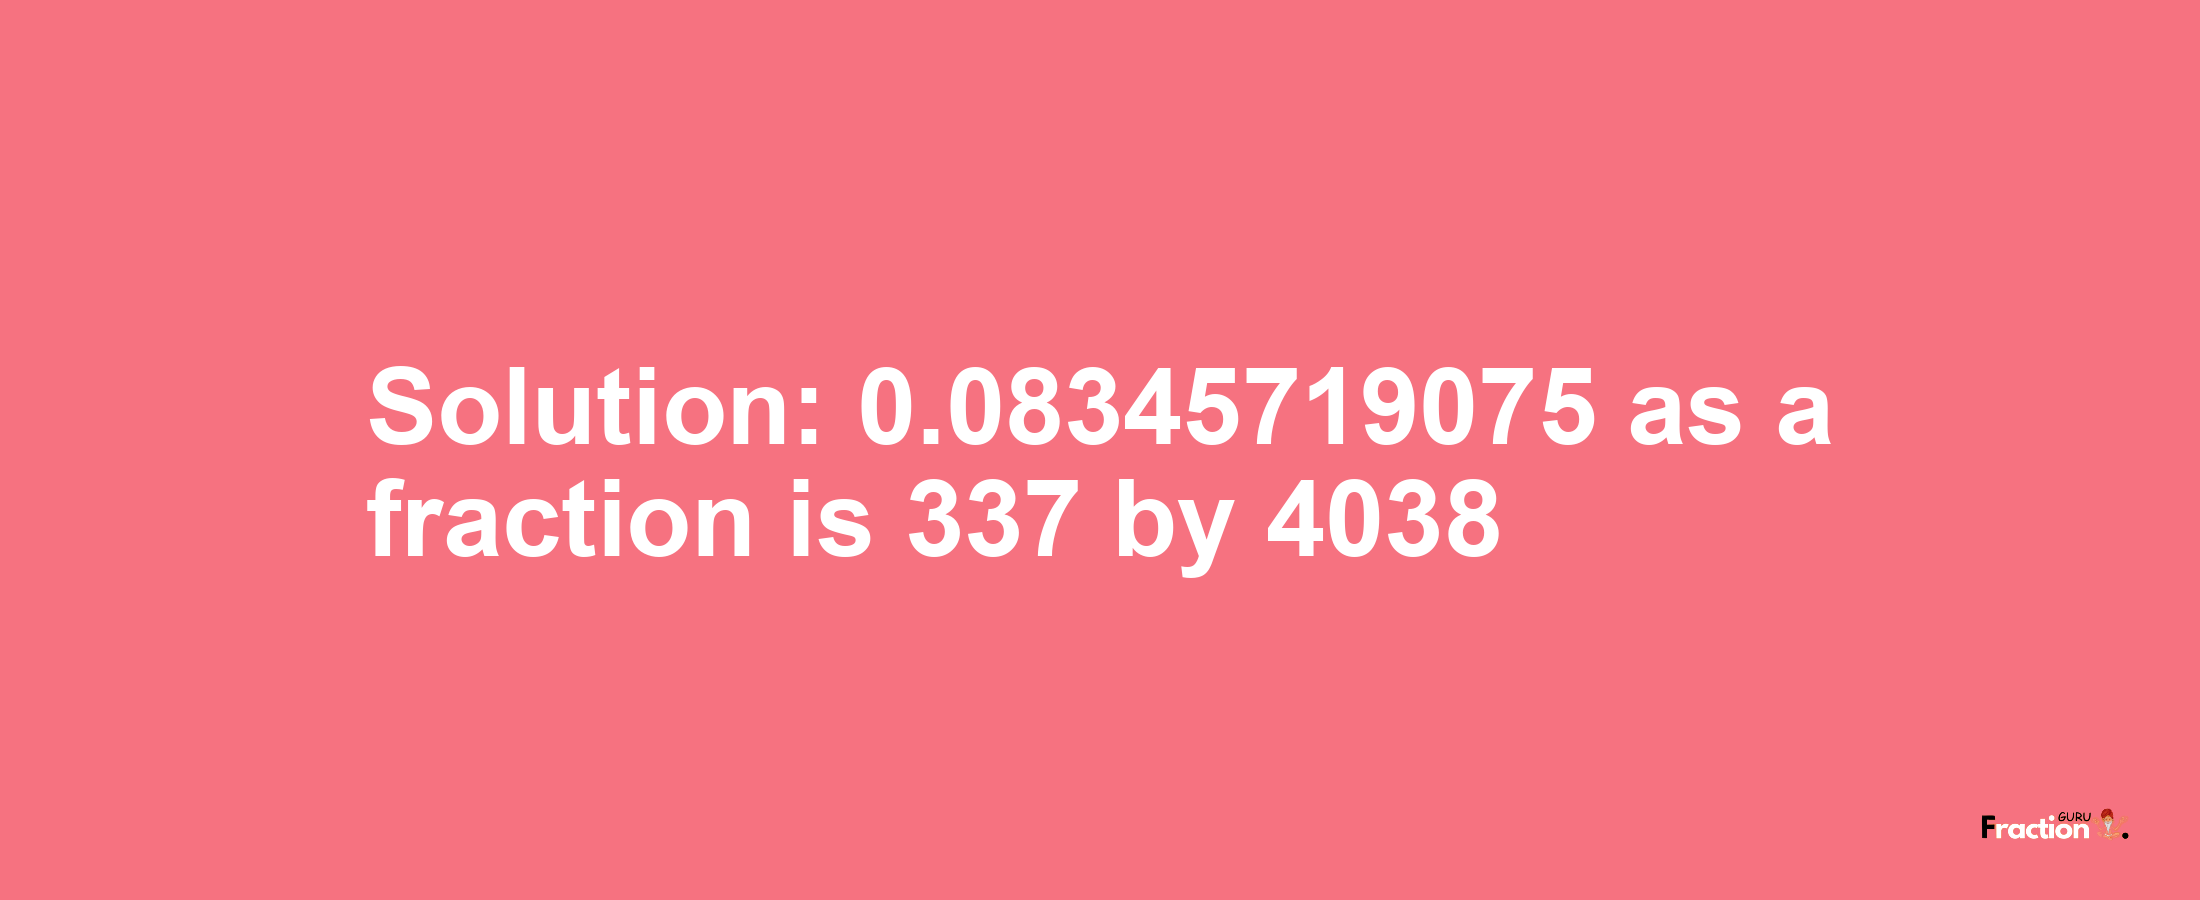 Solution:0.08345719075 as a fraction is 337/4038